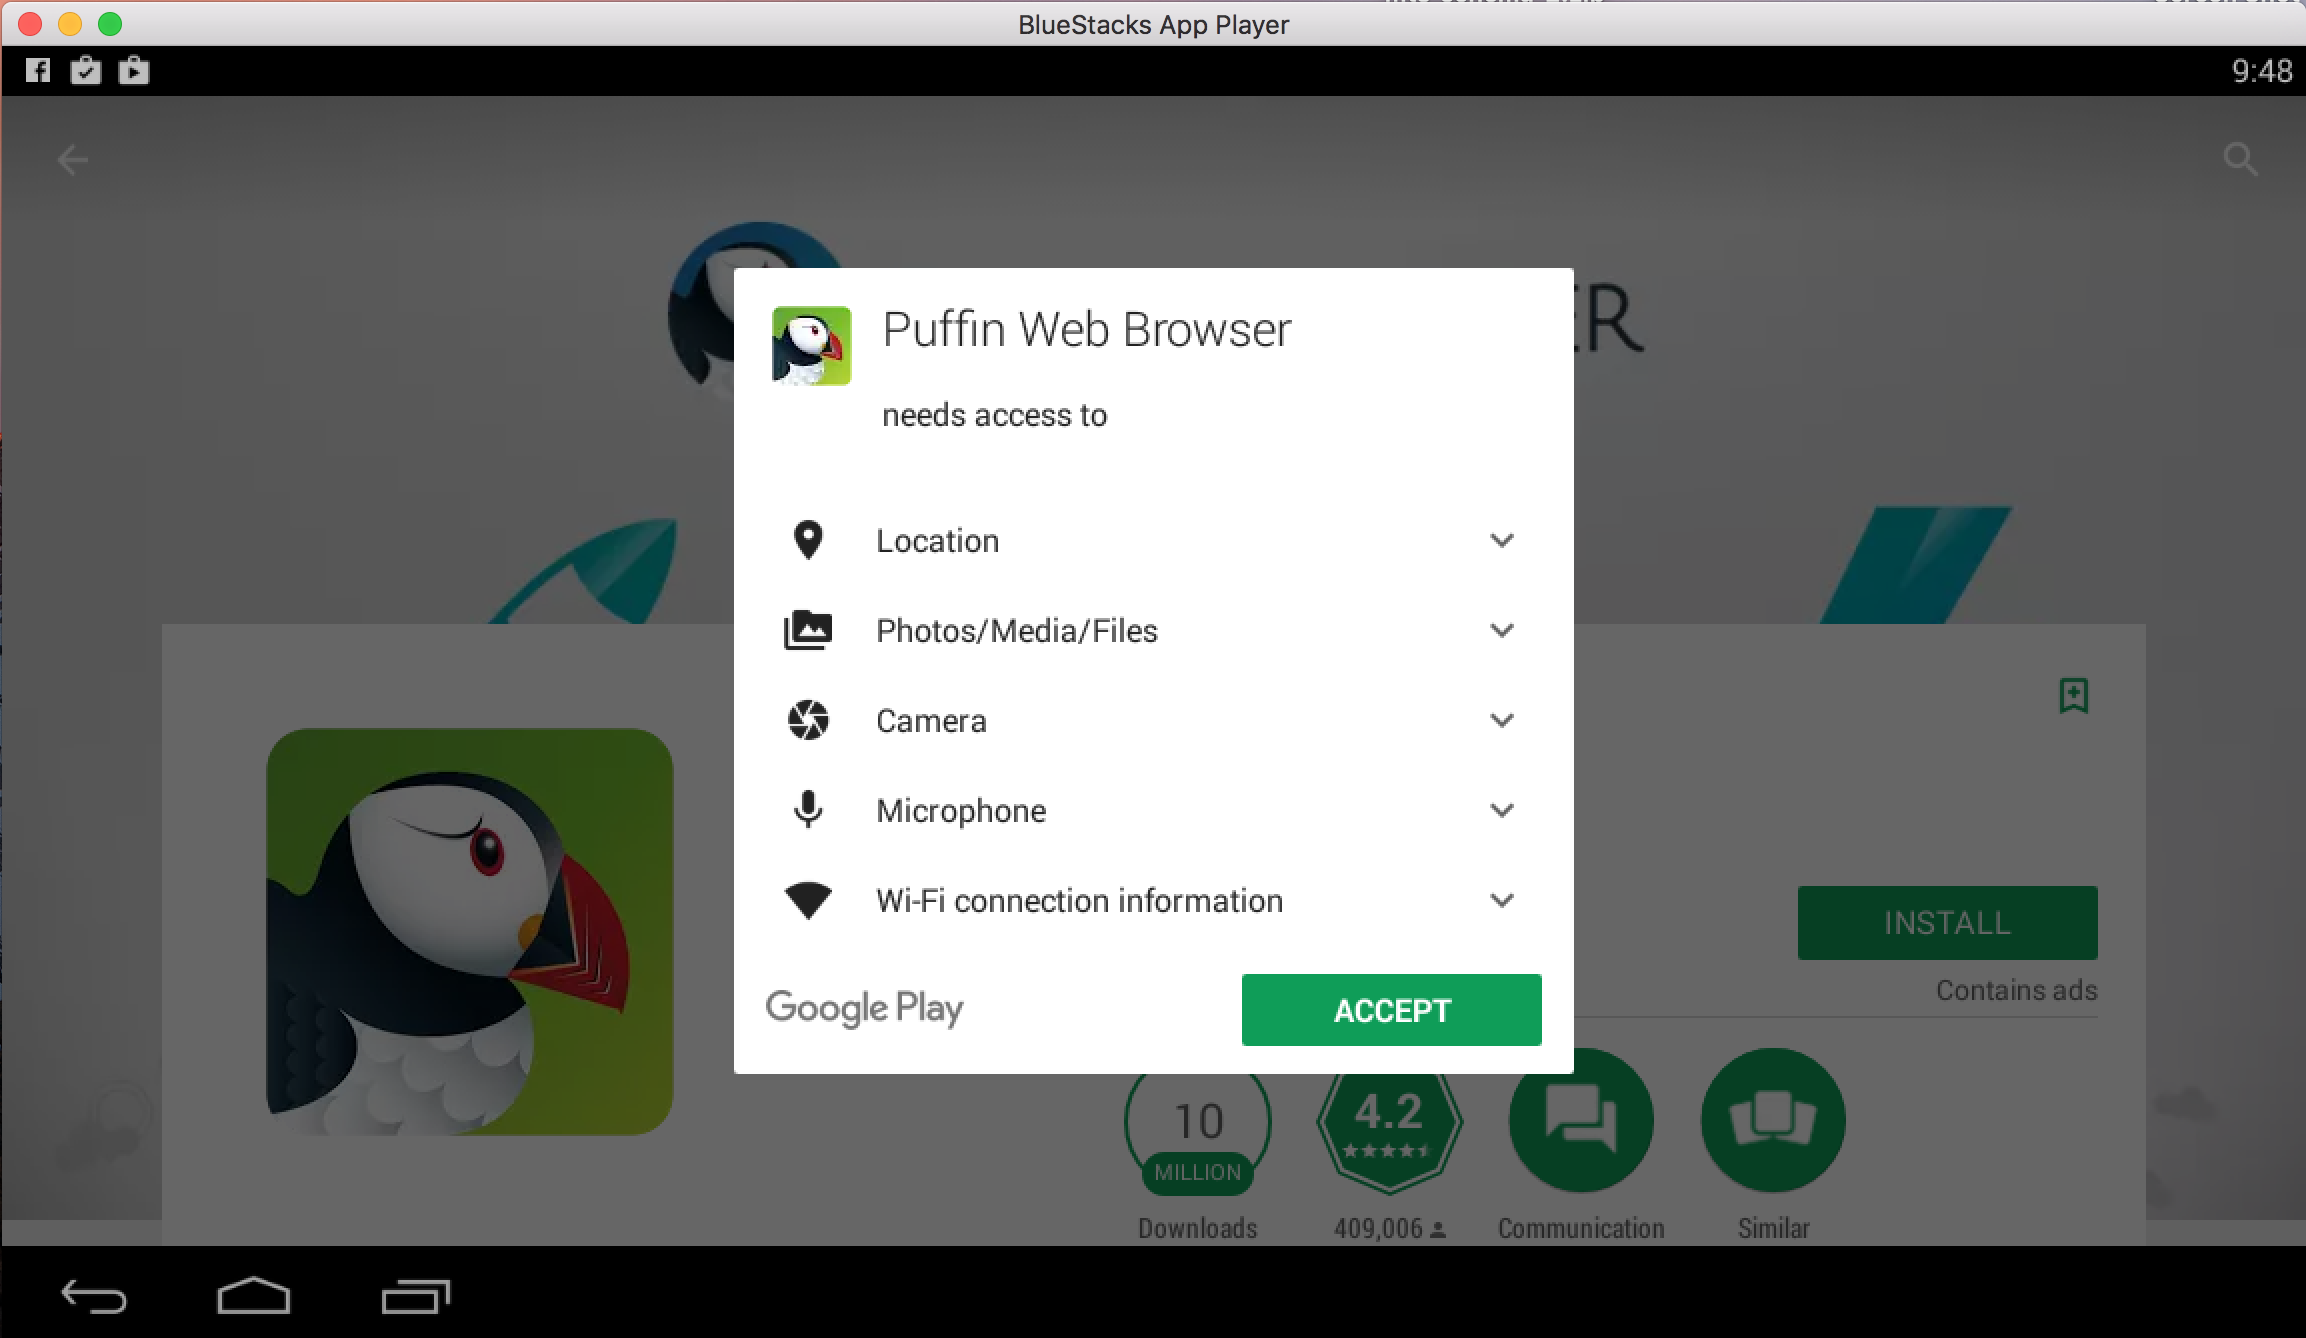 puffin browser for pc 32 bit xp